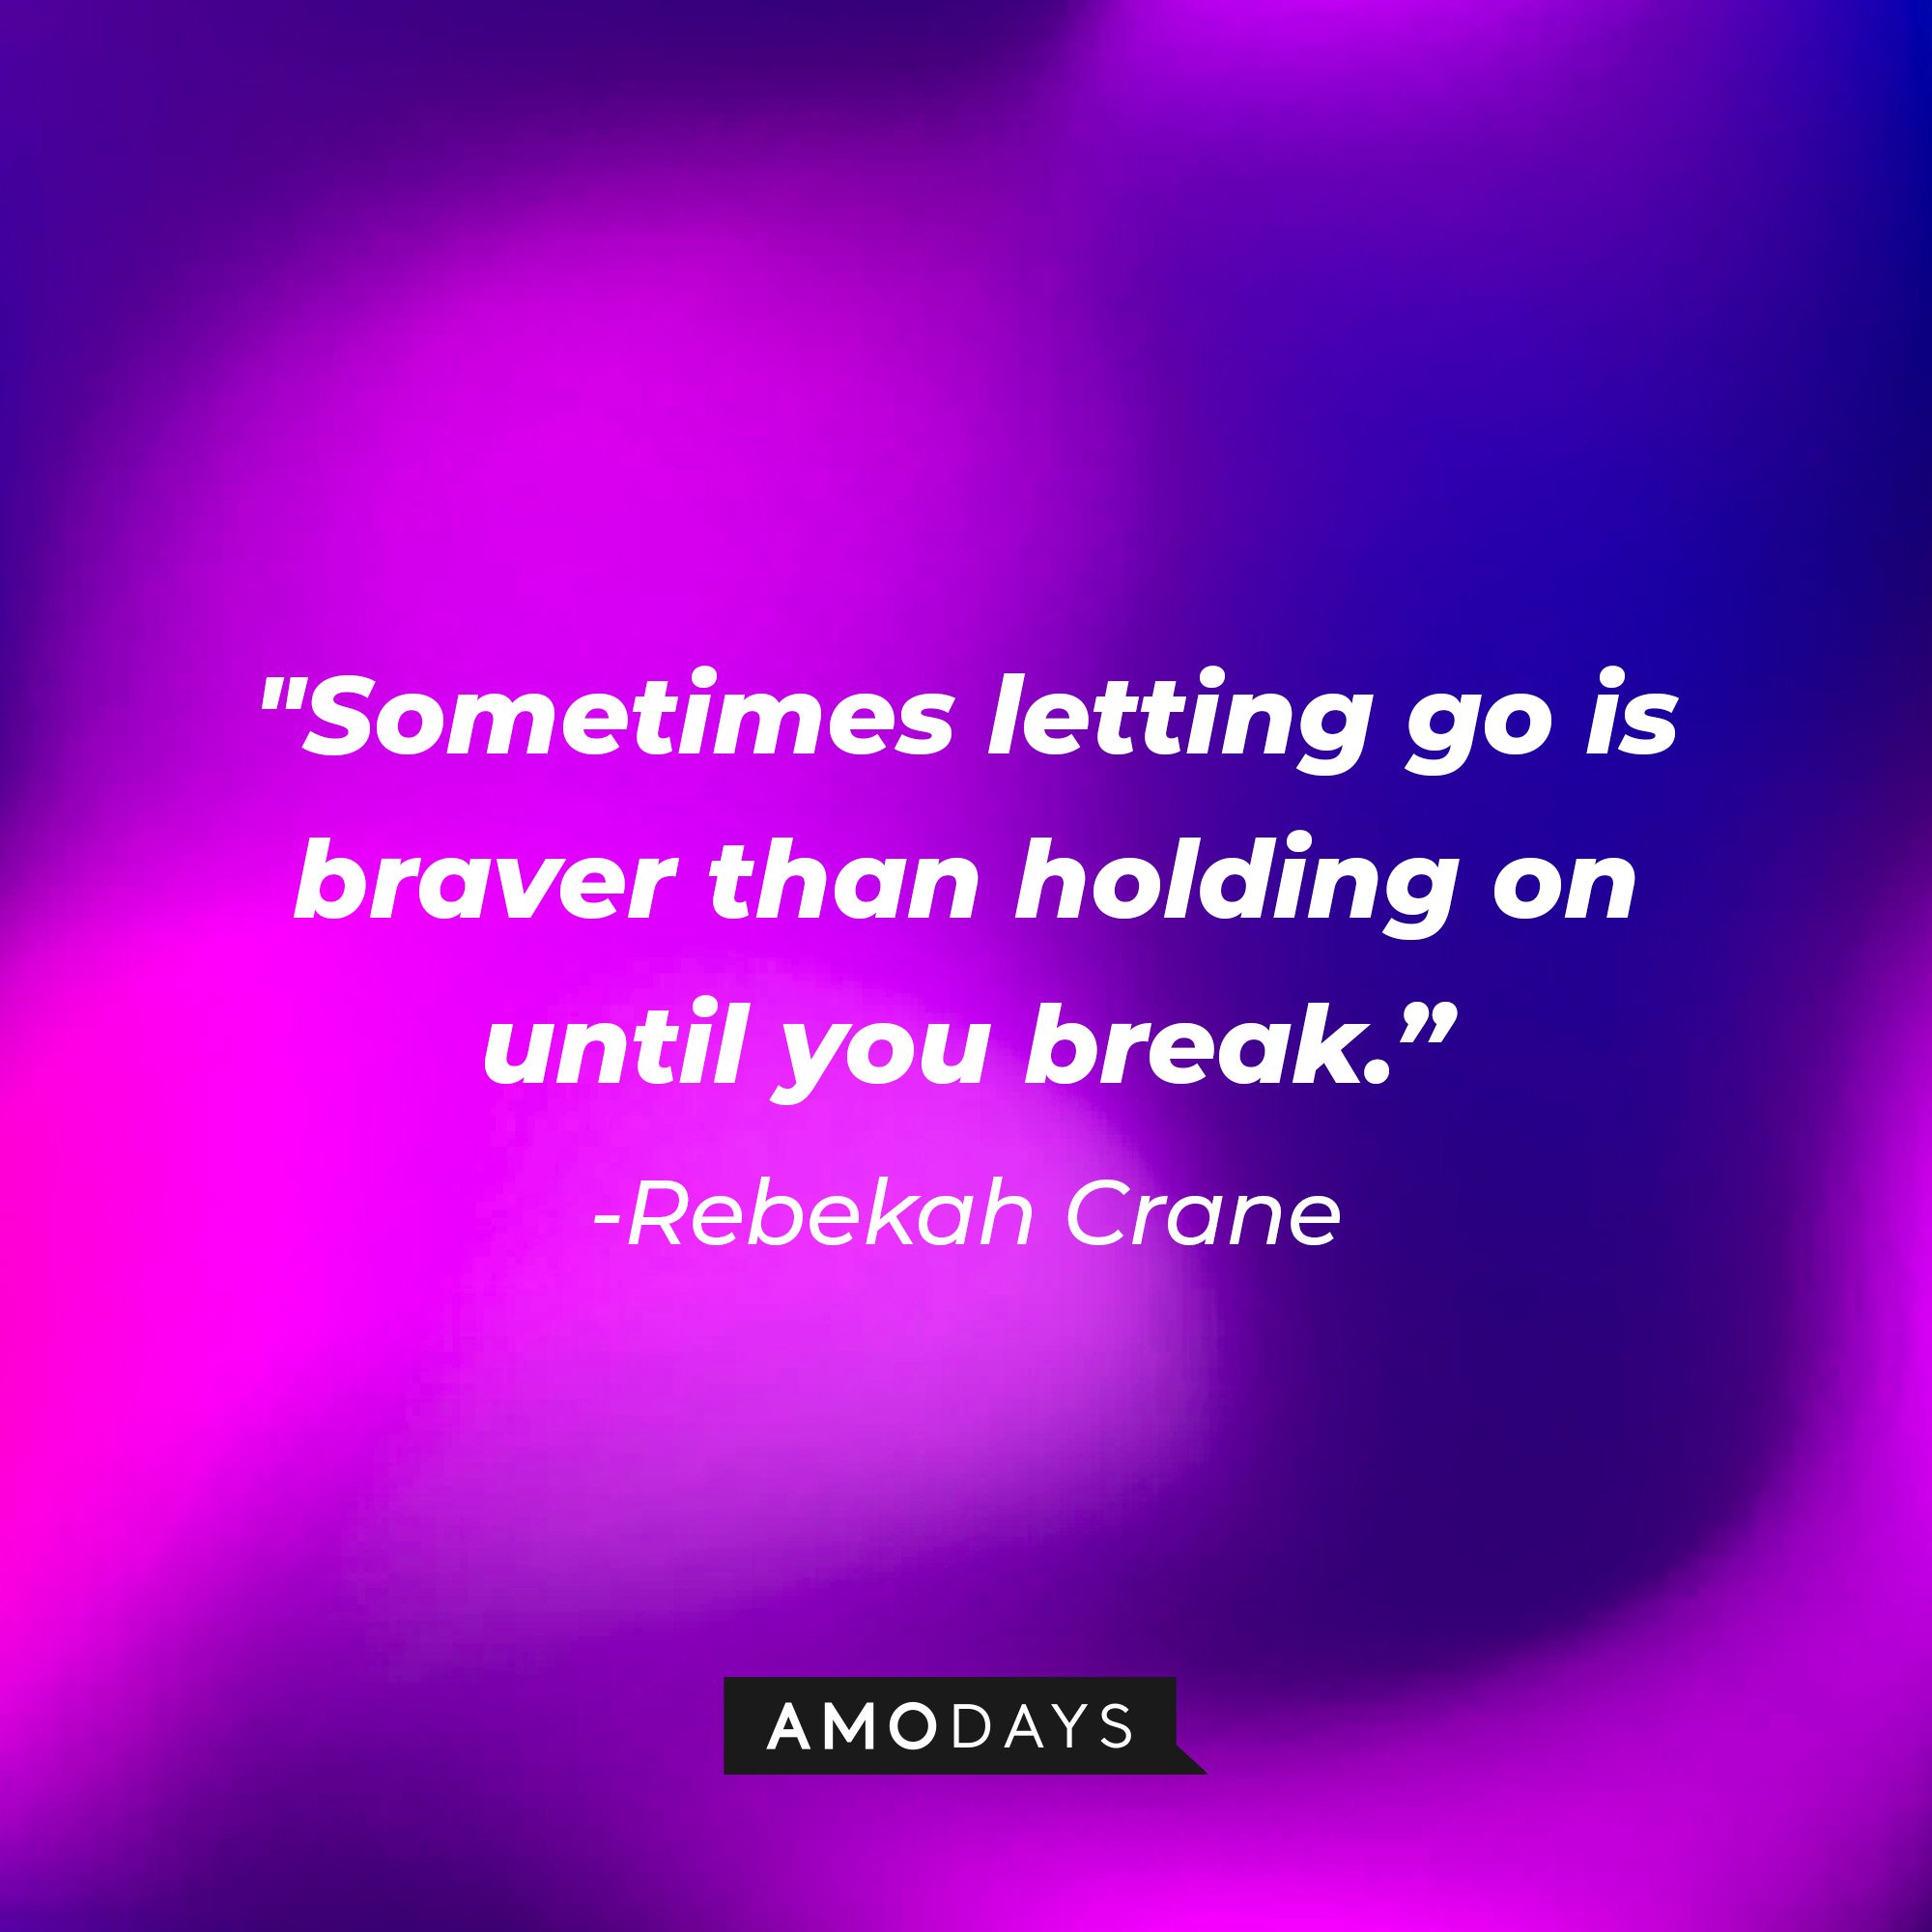 Rebekah Crane’s quote: "Sometimes letting go is braver than holding on until you break.” | Image: AmoDays